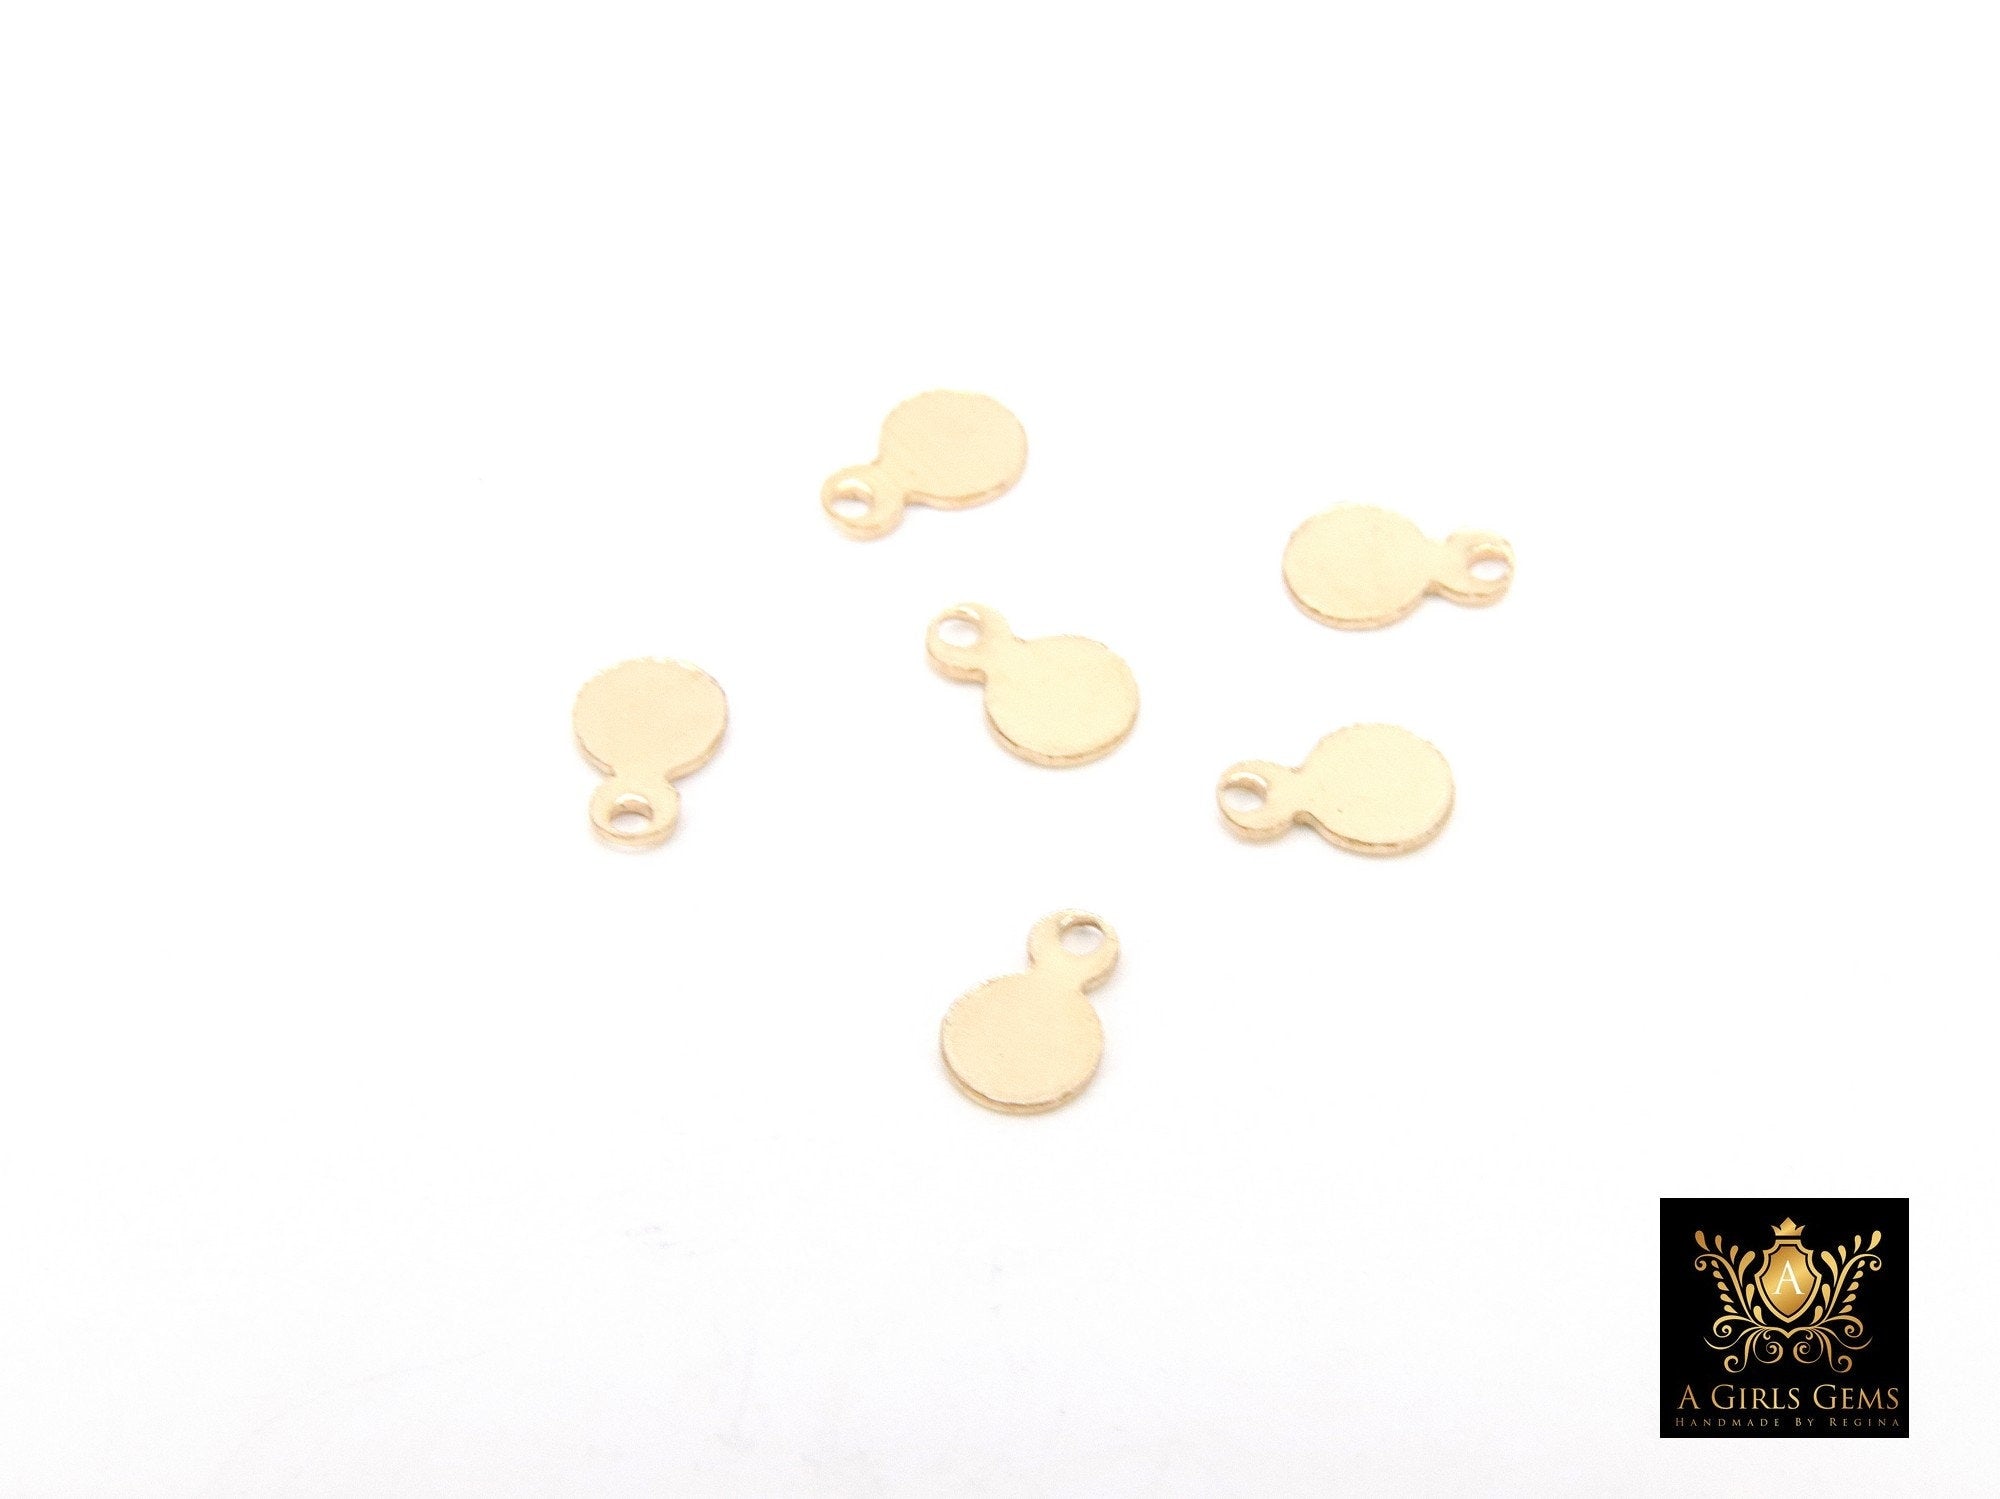 14 K Gold Filled Round Disc Charms, 4 mm Tiny Flat Gold Blanks #21, Minimalist 14 20 Jewelry